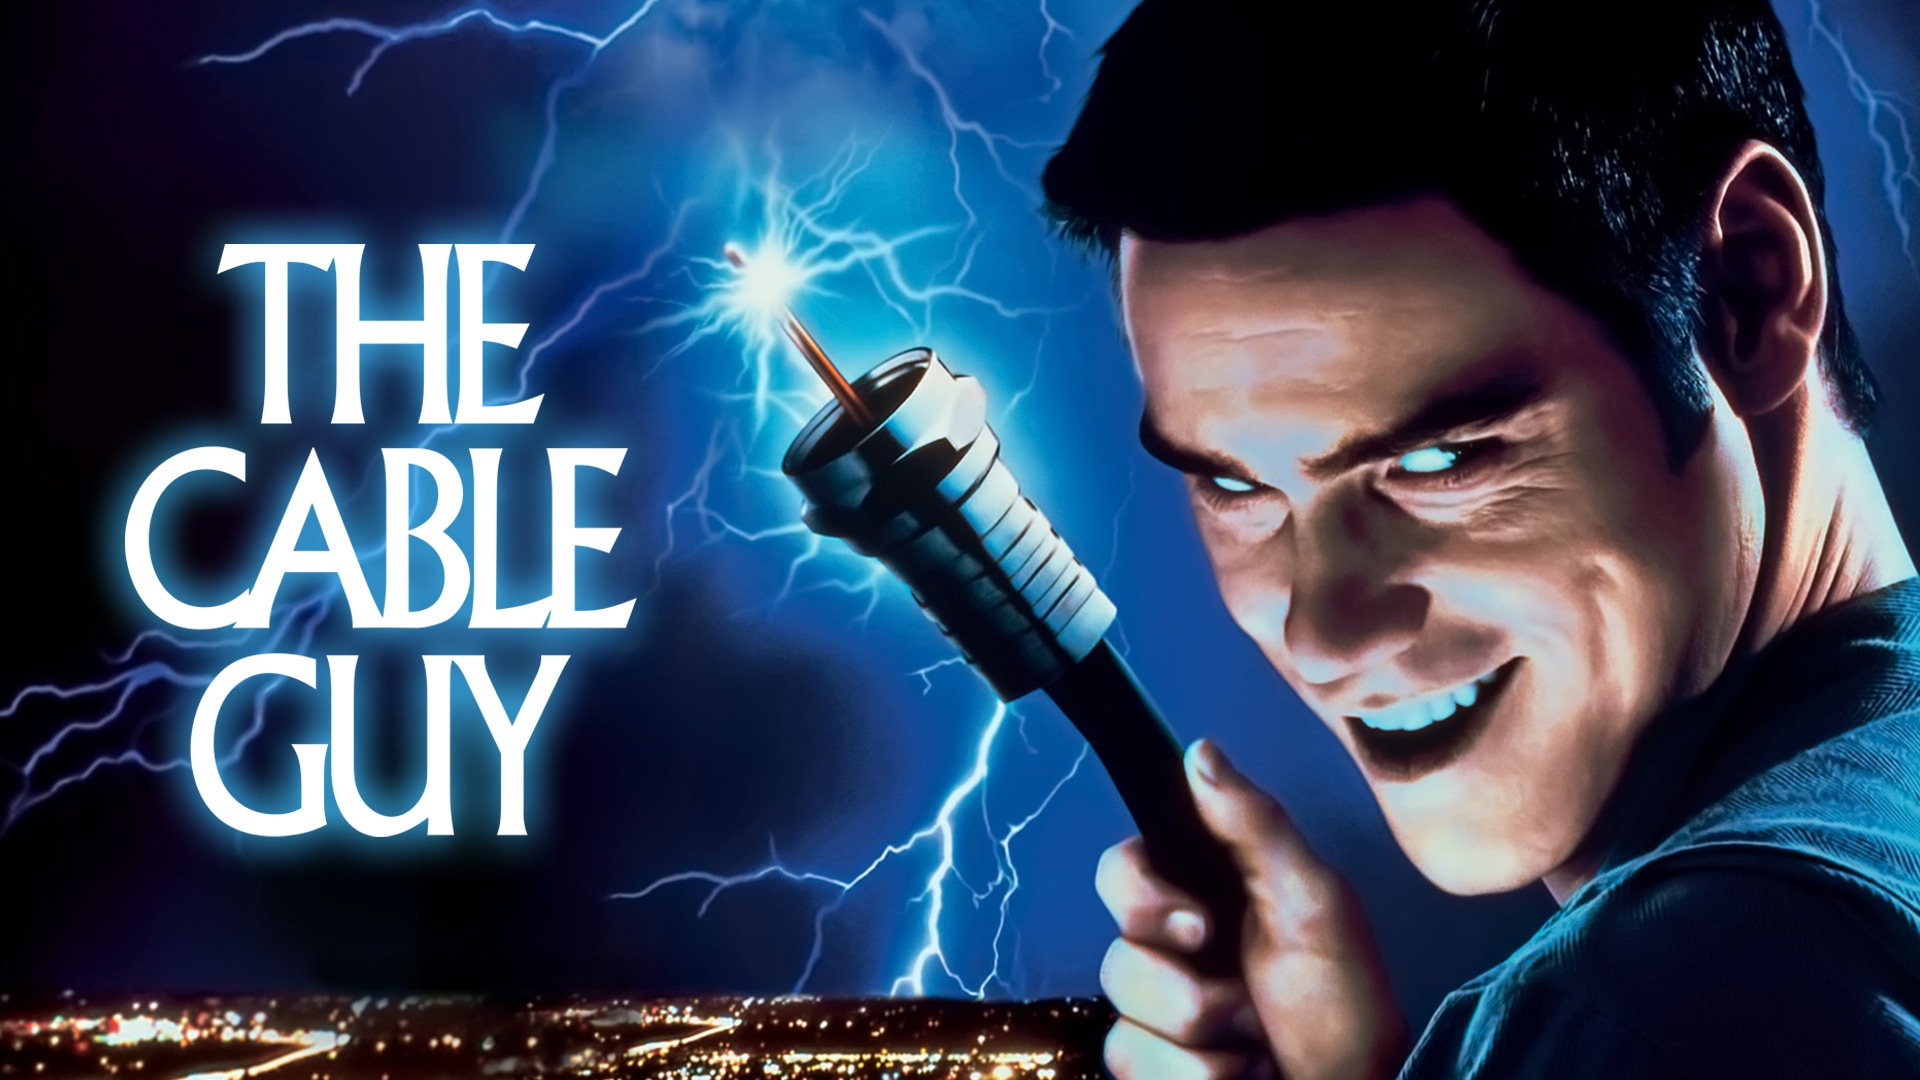 Watch The Cable Guy Online | Stream Full Movies